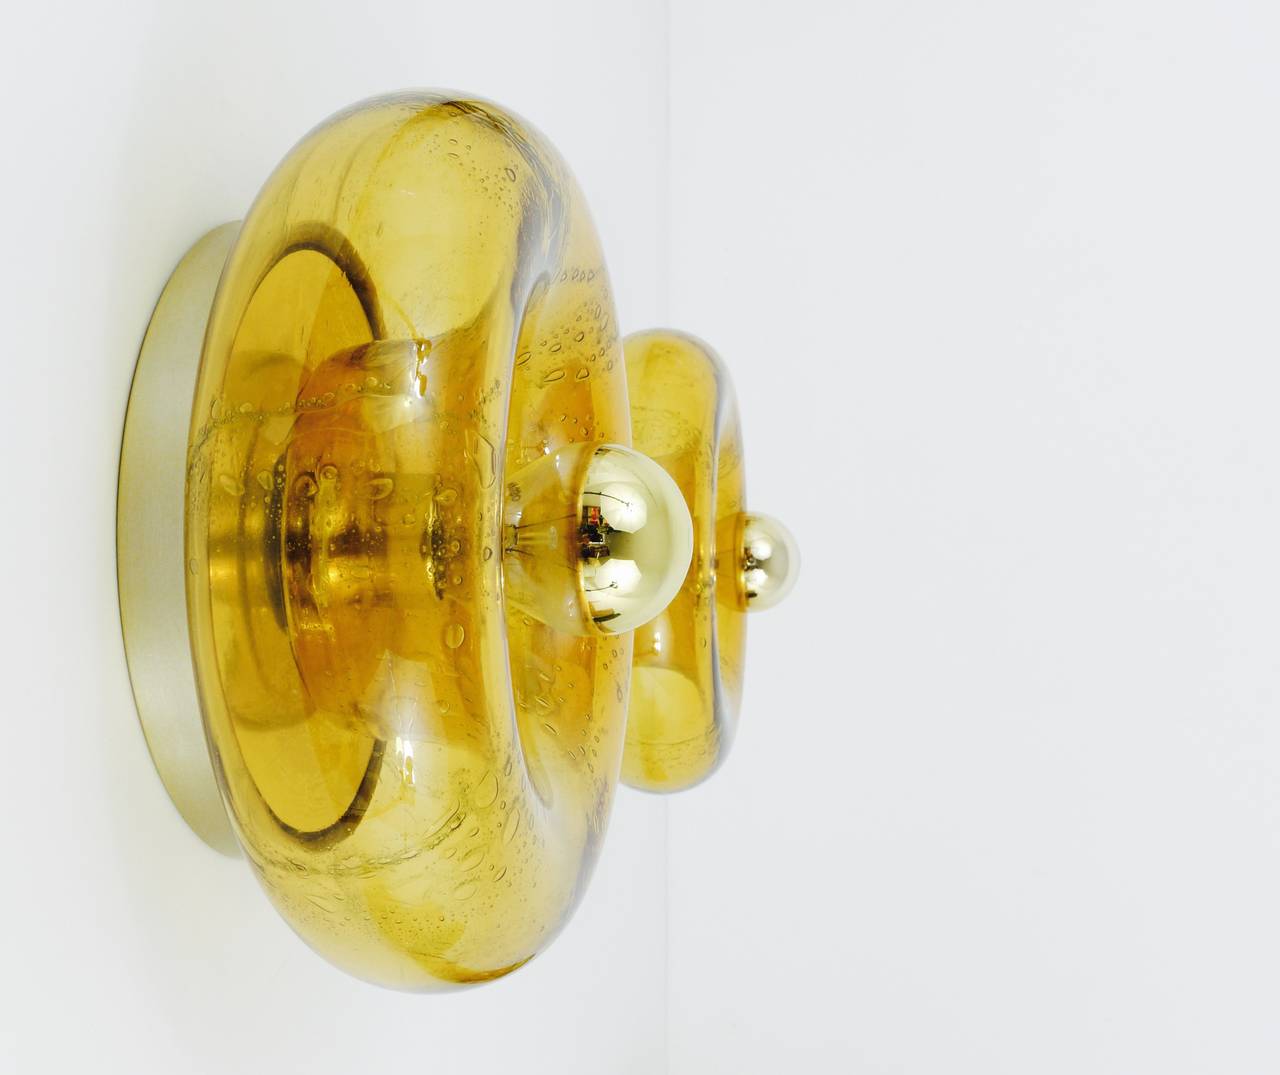 One round glass wall light, executed by Doria Leuchten, Germany, in the 1970s. Very beautiful, handblown of yellow amber-colored glass with nice bubbles and iridescent surface. In excellent condition. Making a wonderful light. 